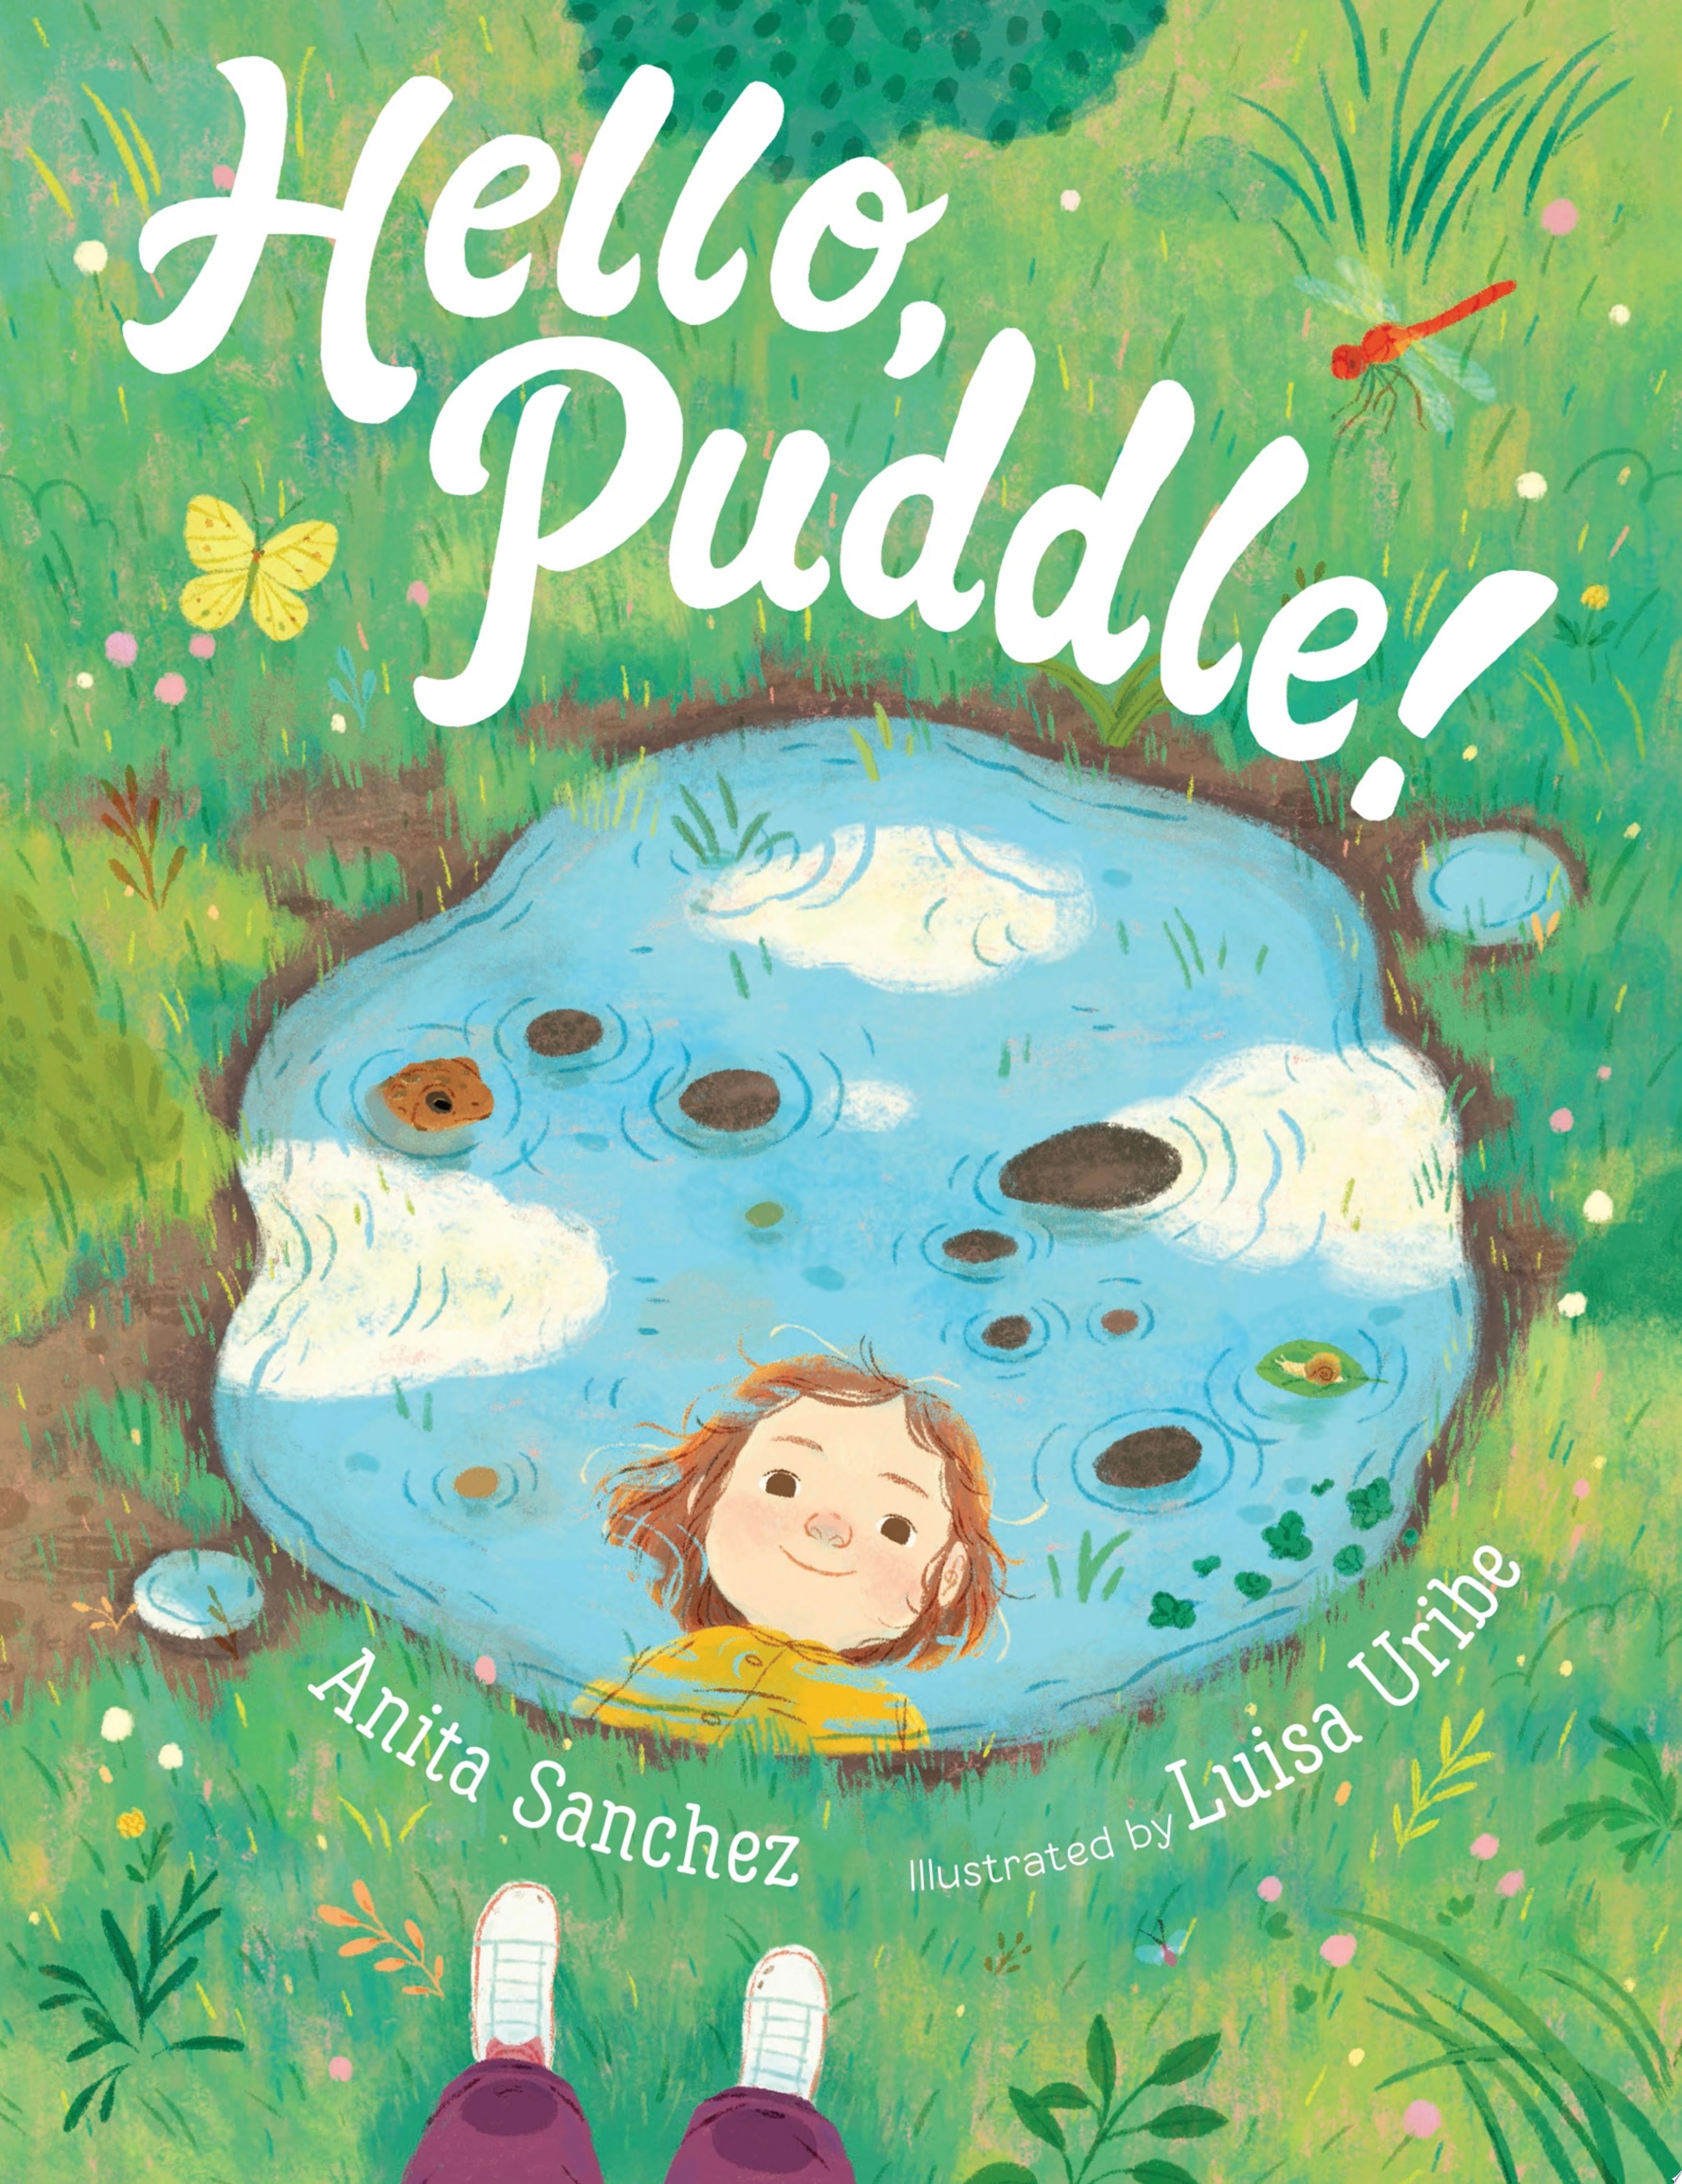 Image for "Hello, Puddle!"